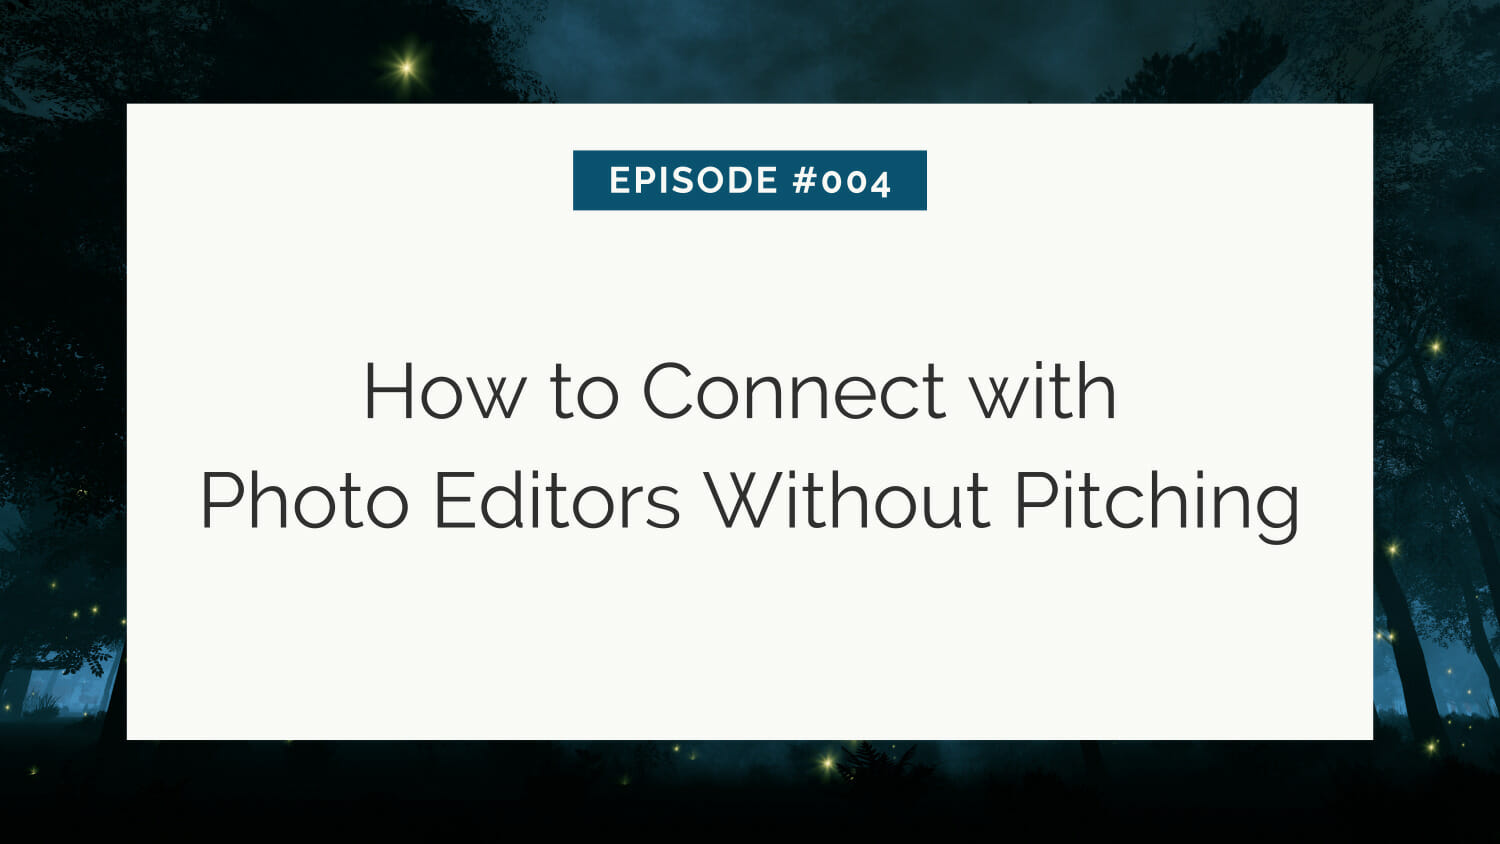 Title slide for episode #004 - "how to connect with photo editors without pitching" against a serene, tree-lined background.